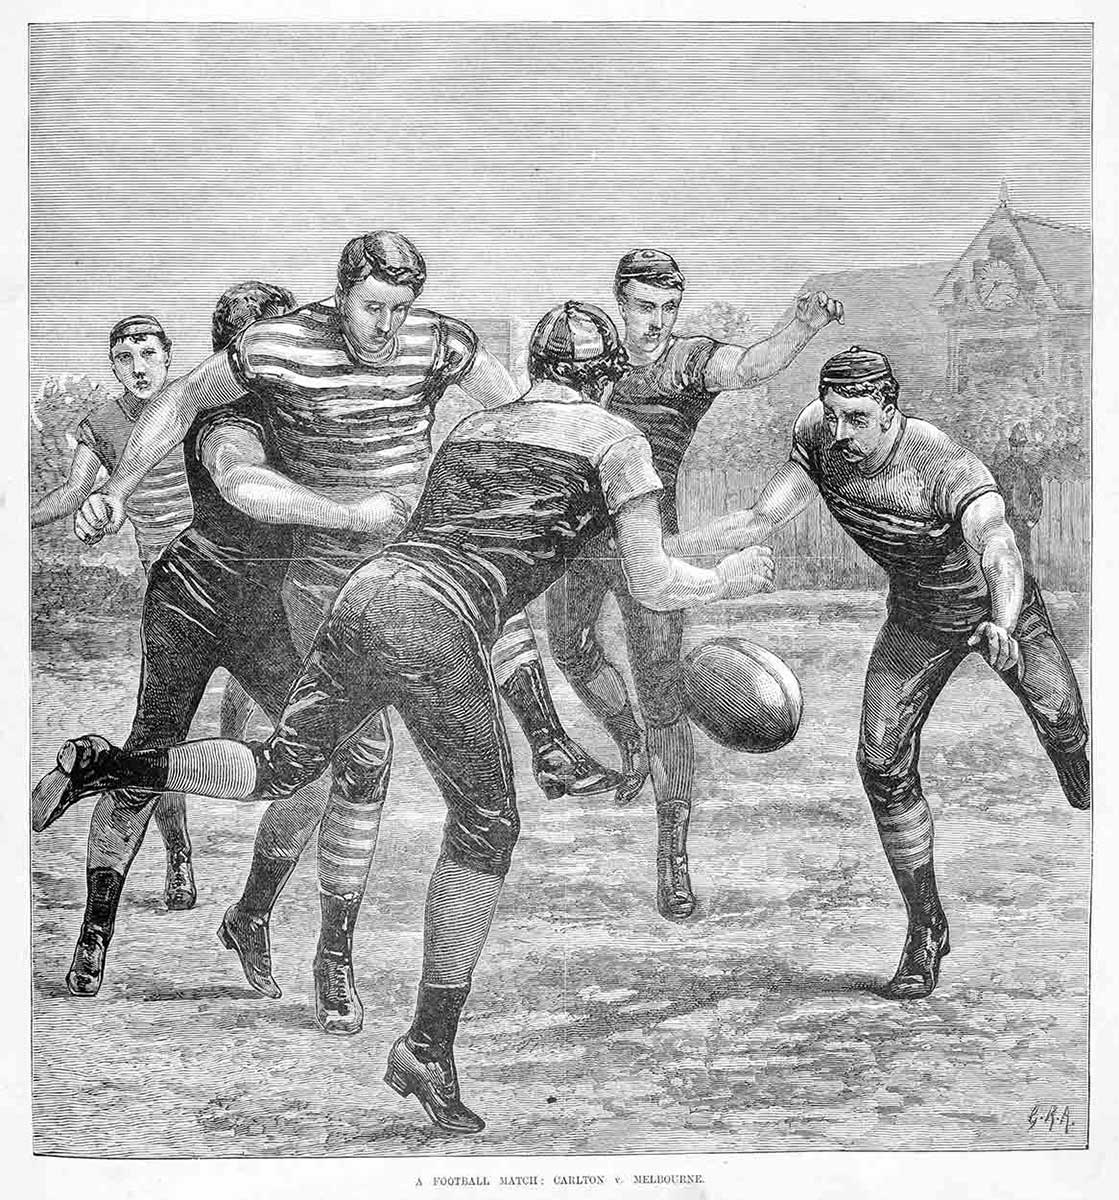 Illustration of a group of men playing football.